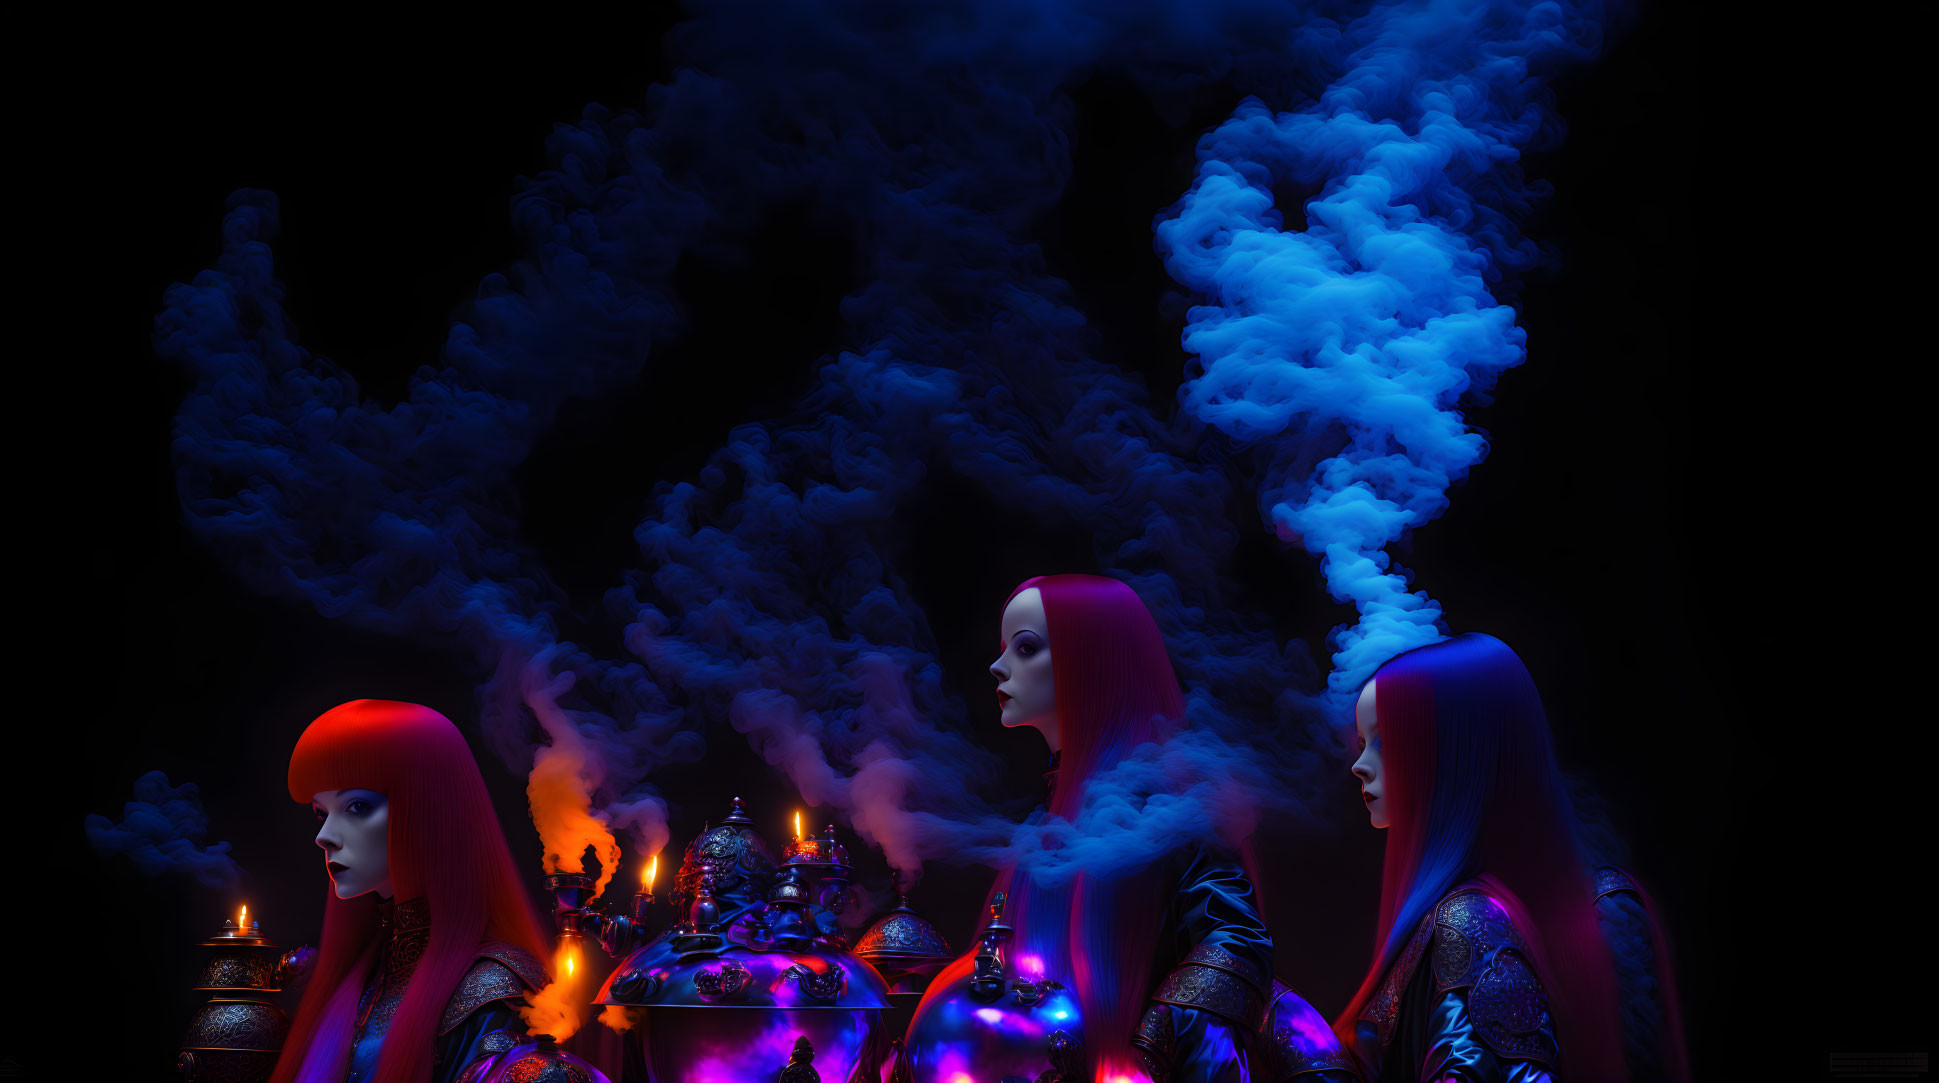 Three women with red hair and tattoos around a steaming vessel in a dark setting